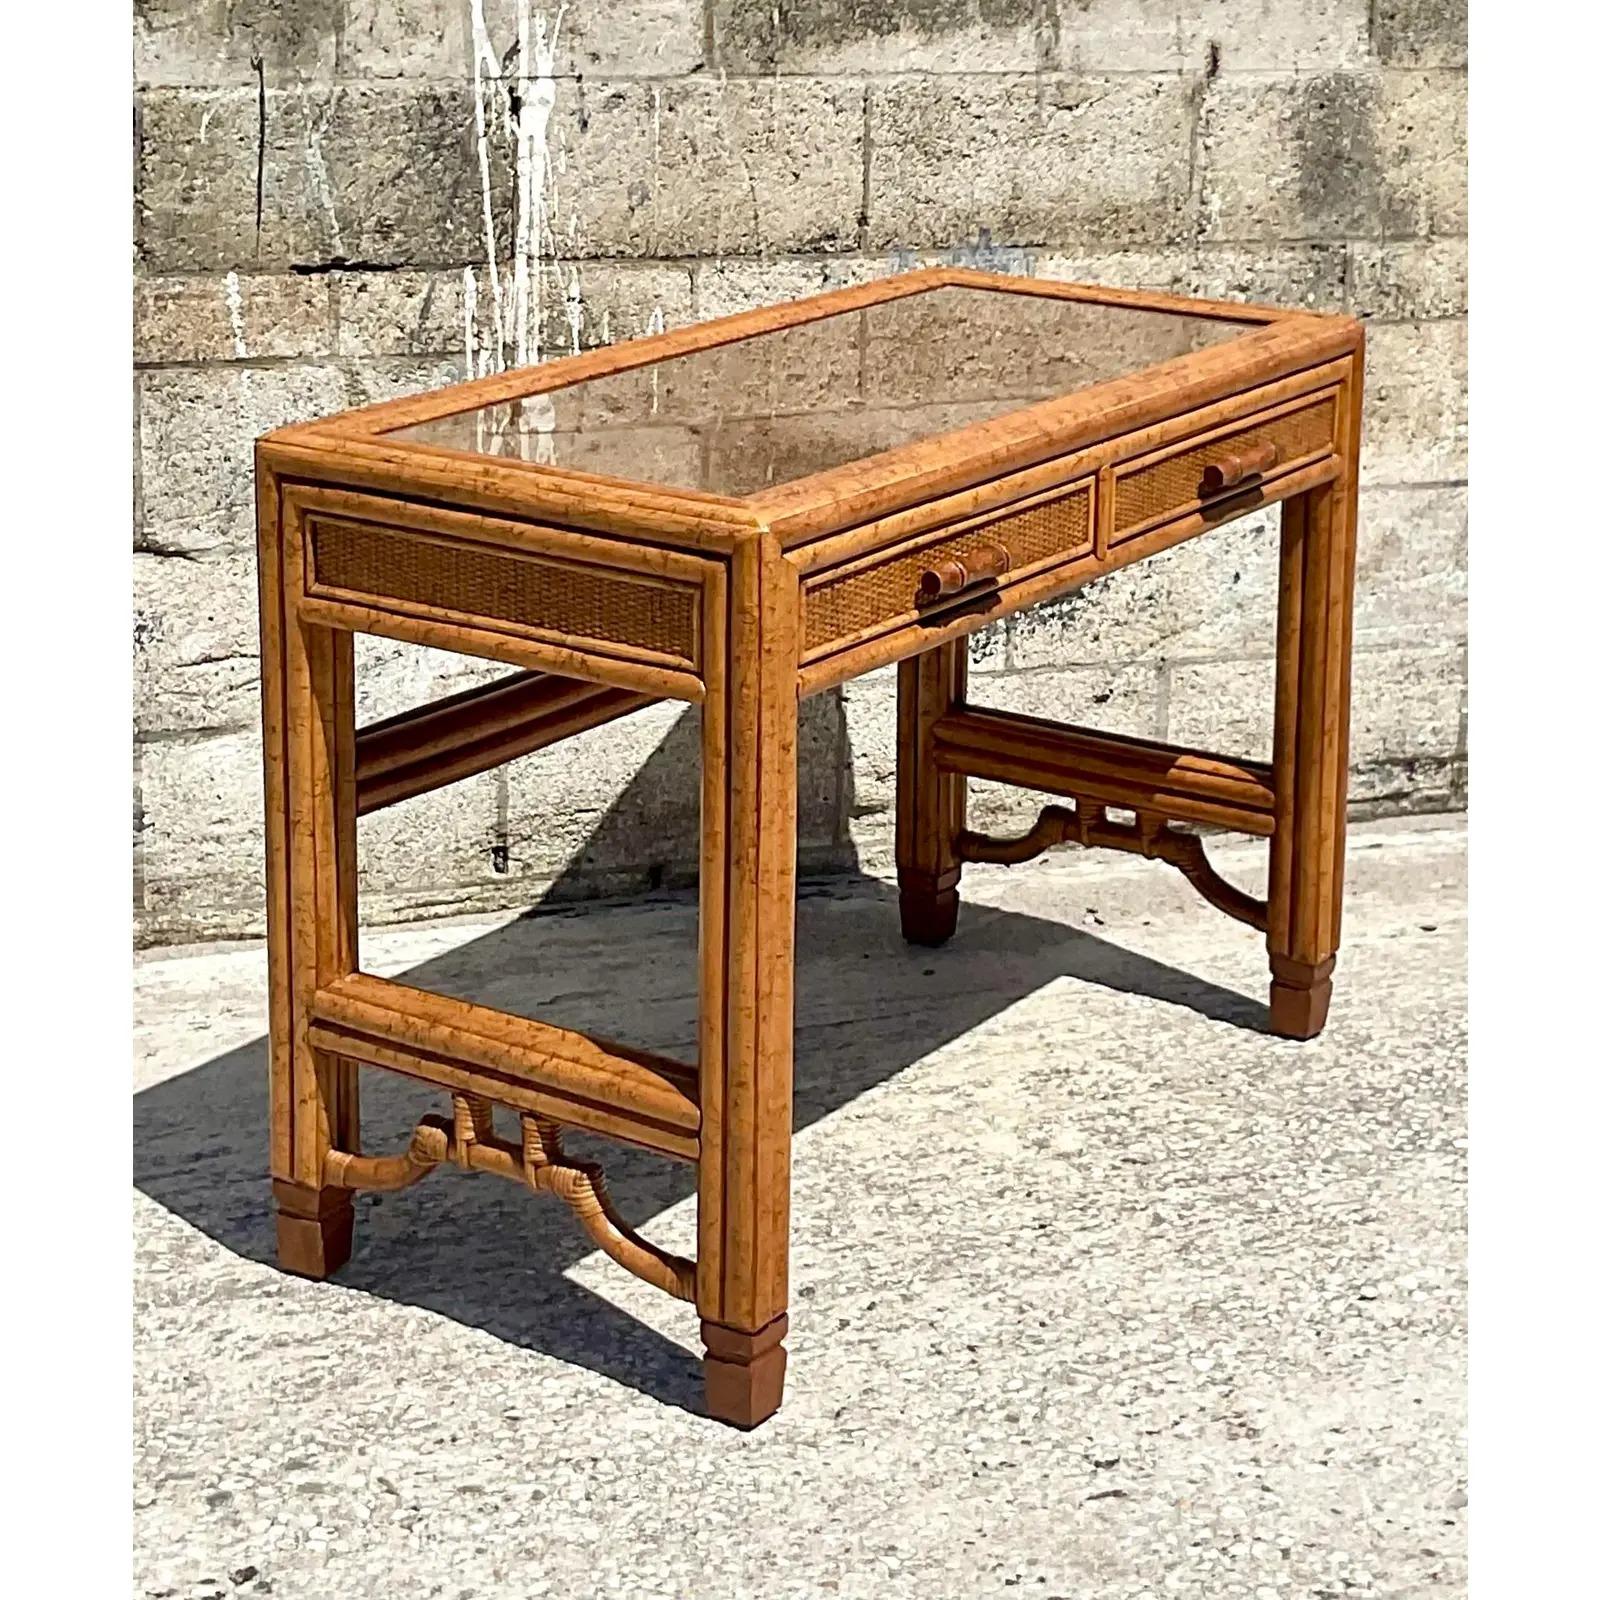 Fantastic vintage Coastal writing desk. Beautiful clean design with inset woven rattan panels. Acquired from a Palm Beach estate.